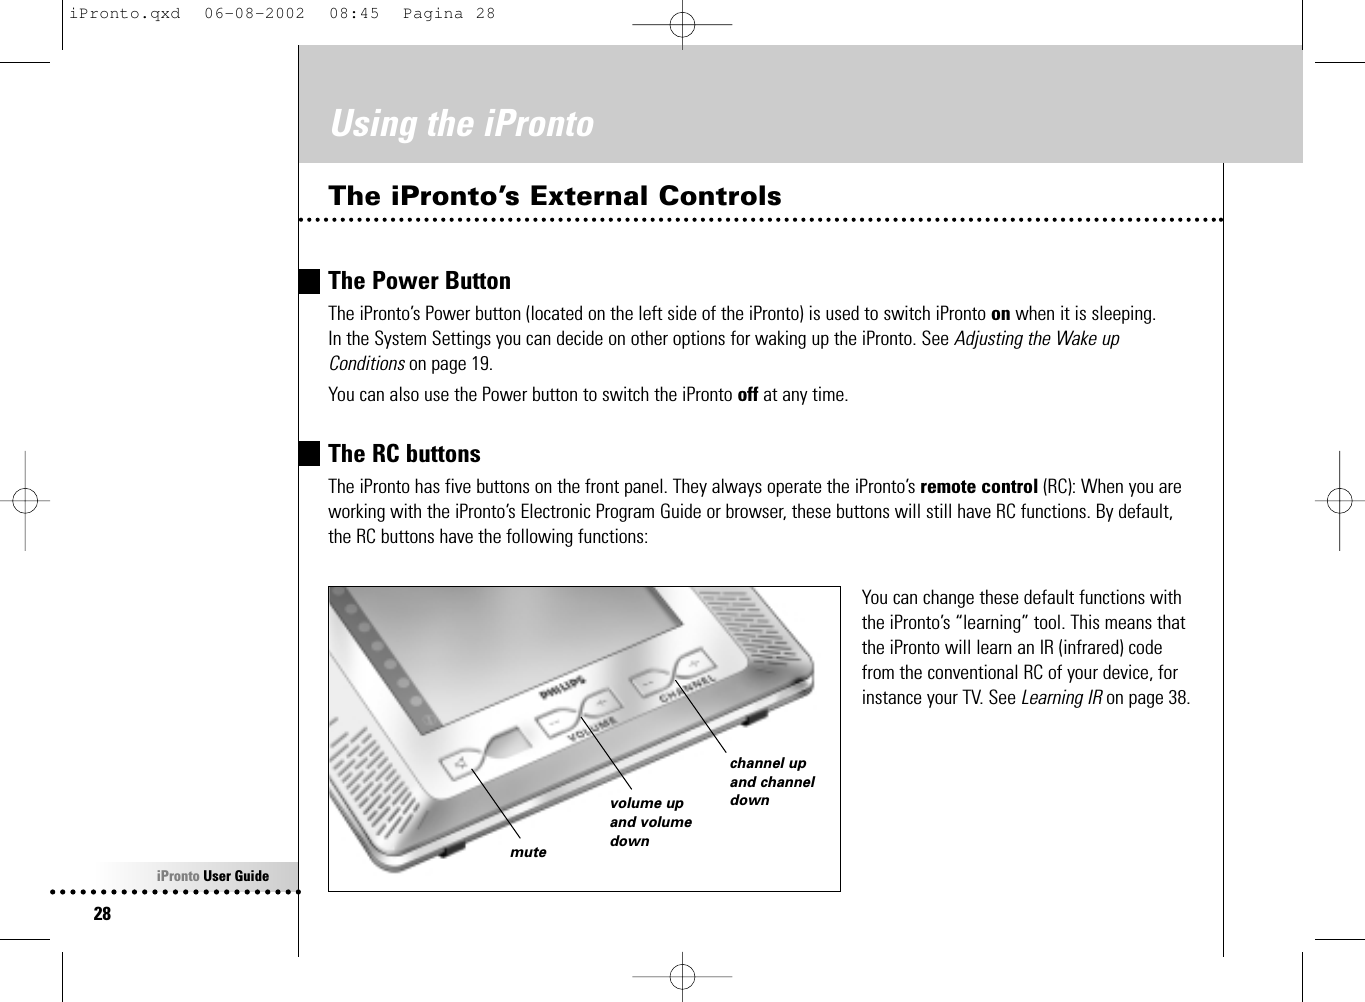 iPronto User Guide28Using the iProntoThe iPronto’s External ControlsThe Power ButtonThe iPronto’s Power button (located on the left side of the iPronto) is used to switch iPronto on when it is sleeping. In the System Settings you can decide on other options for waking up the iPronto. See Adjusting the Wake upConditions on page 19.You can also use the Power button to switch the iPronto off at any time.The RC buttonsThe iPronto has five buttons on the front panel. They always operate the iPronto’s remote control (RC): When you areworking with the iPronto’s Electronic Program Guide or browser, these buttons will still have RC functions. By default,the RC buttons have the following functions:You can change these default functions withthe iPronto’s “learning” tool. This means thatthe iPronto will learn an IR (infrared) codefrom the conventional RC of your device, forinstance your TV. See Learning IR on page 38.volume upand volumedownmutechannel upand channeldowniPronto.qxd  06-08-2002  08:45  Pagina 28